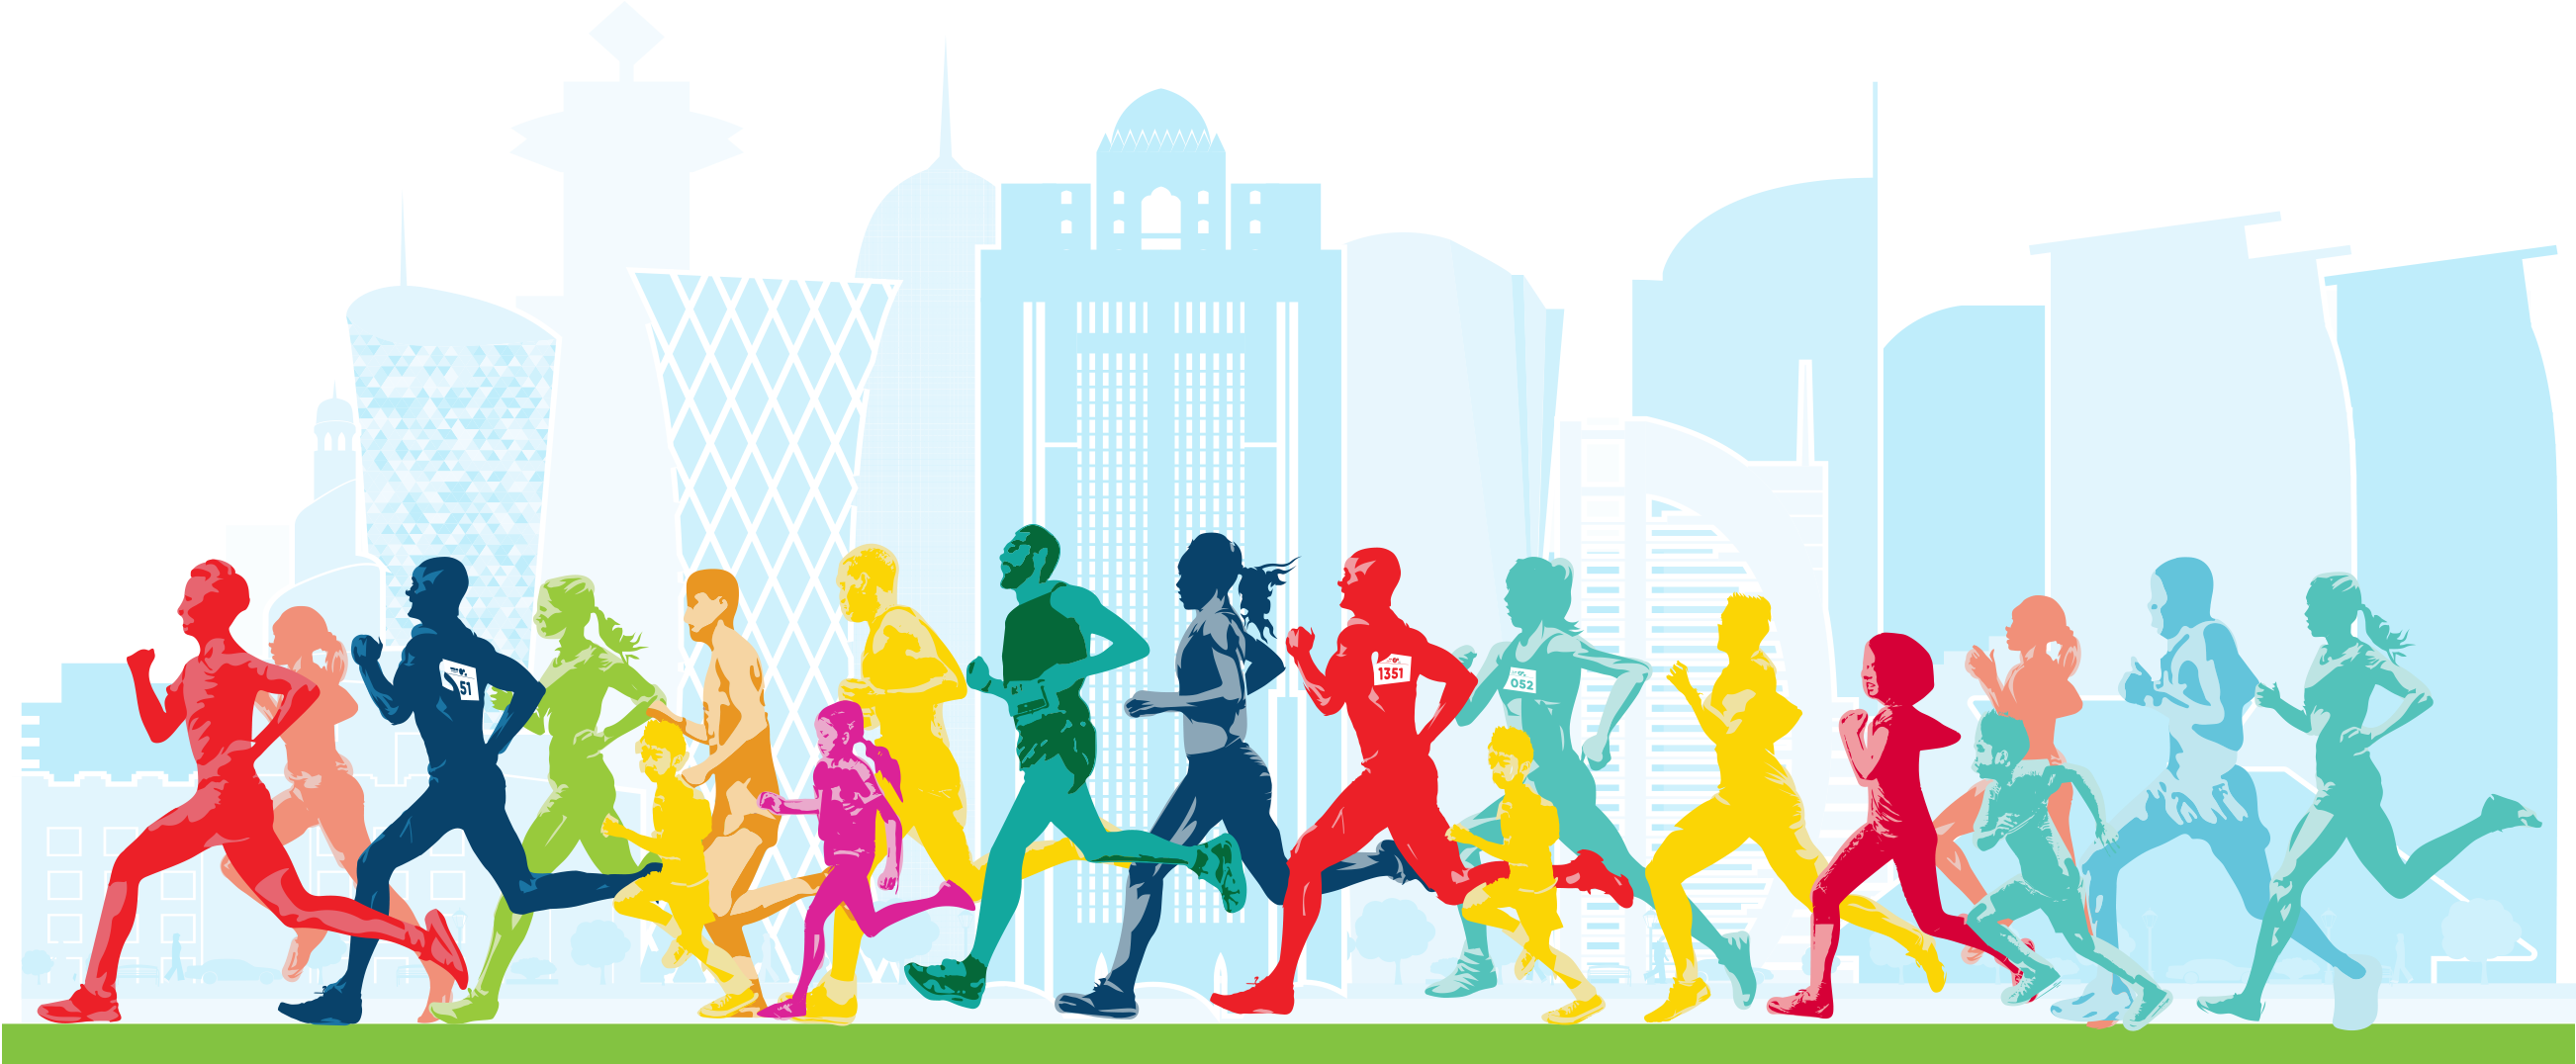 A Group Of People Running In A City